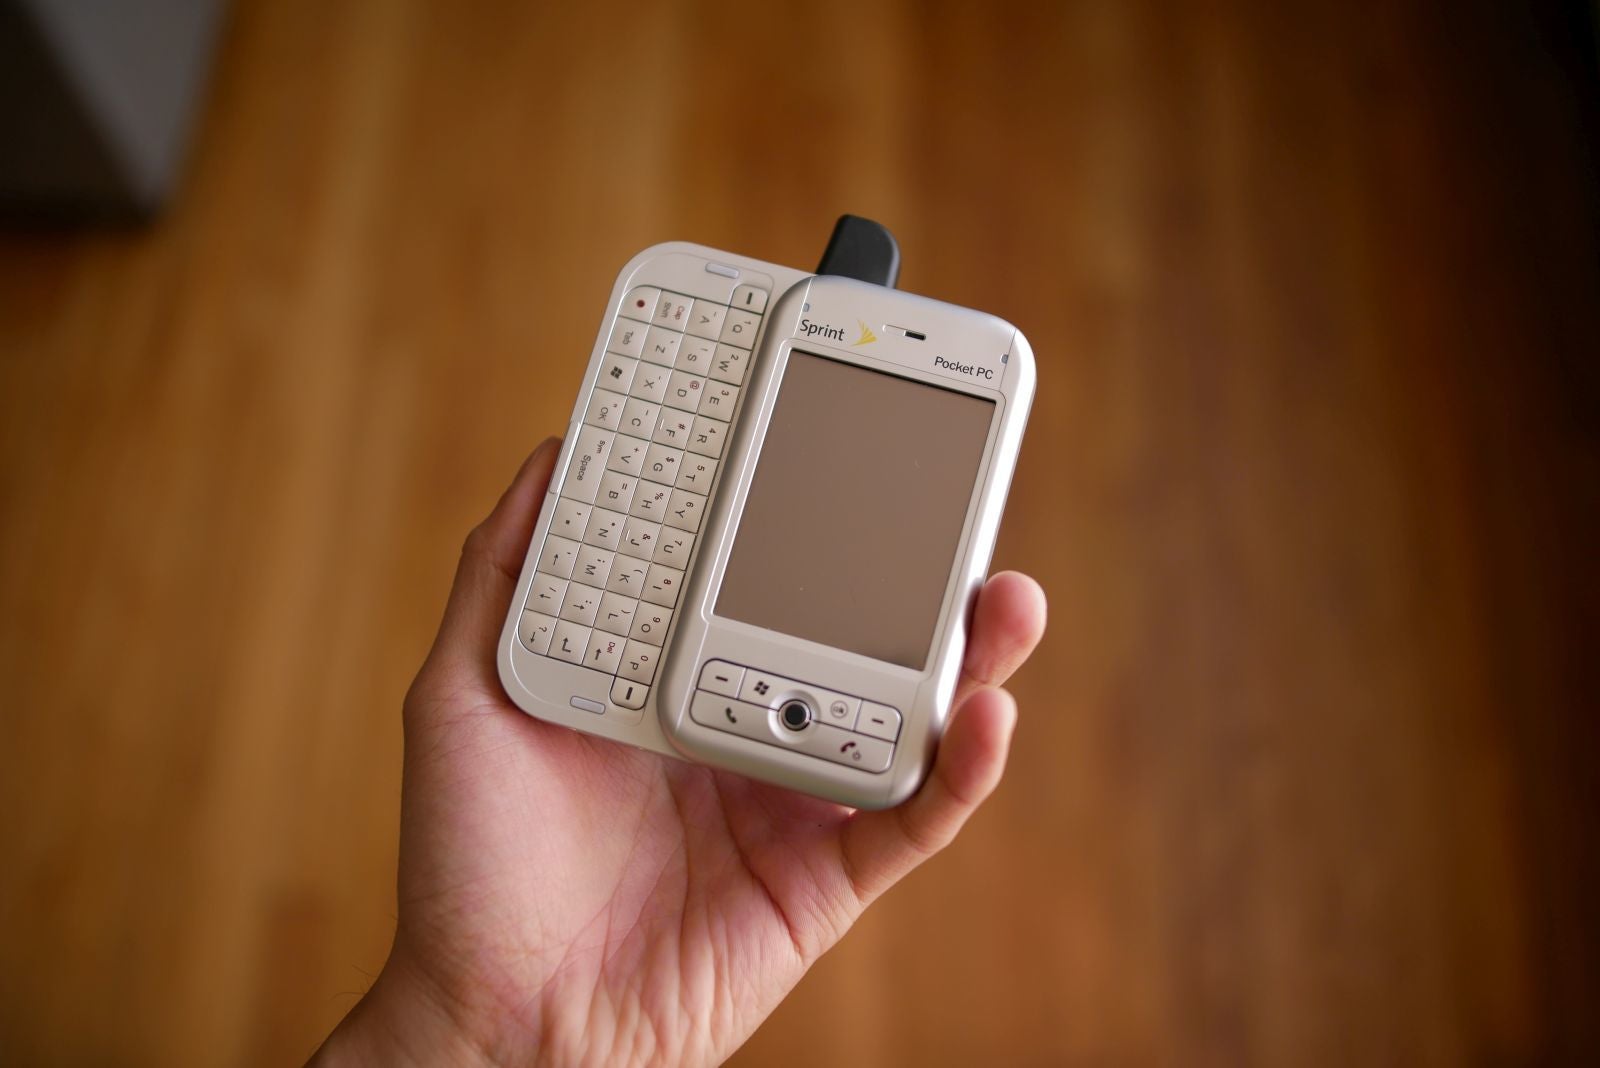 The Sprint PPC6700, one of the many white labeled variants of the HTC Apache. - A look back at the evolution of HTC's smartphone designs